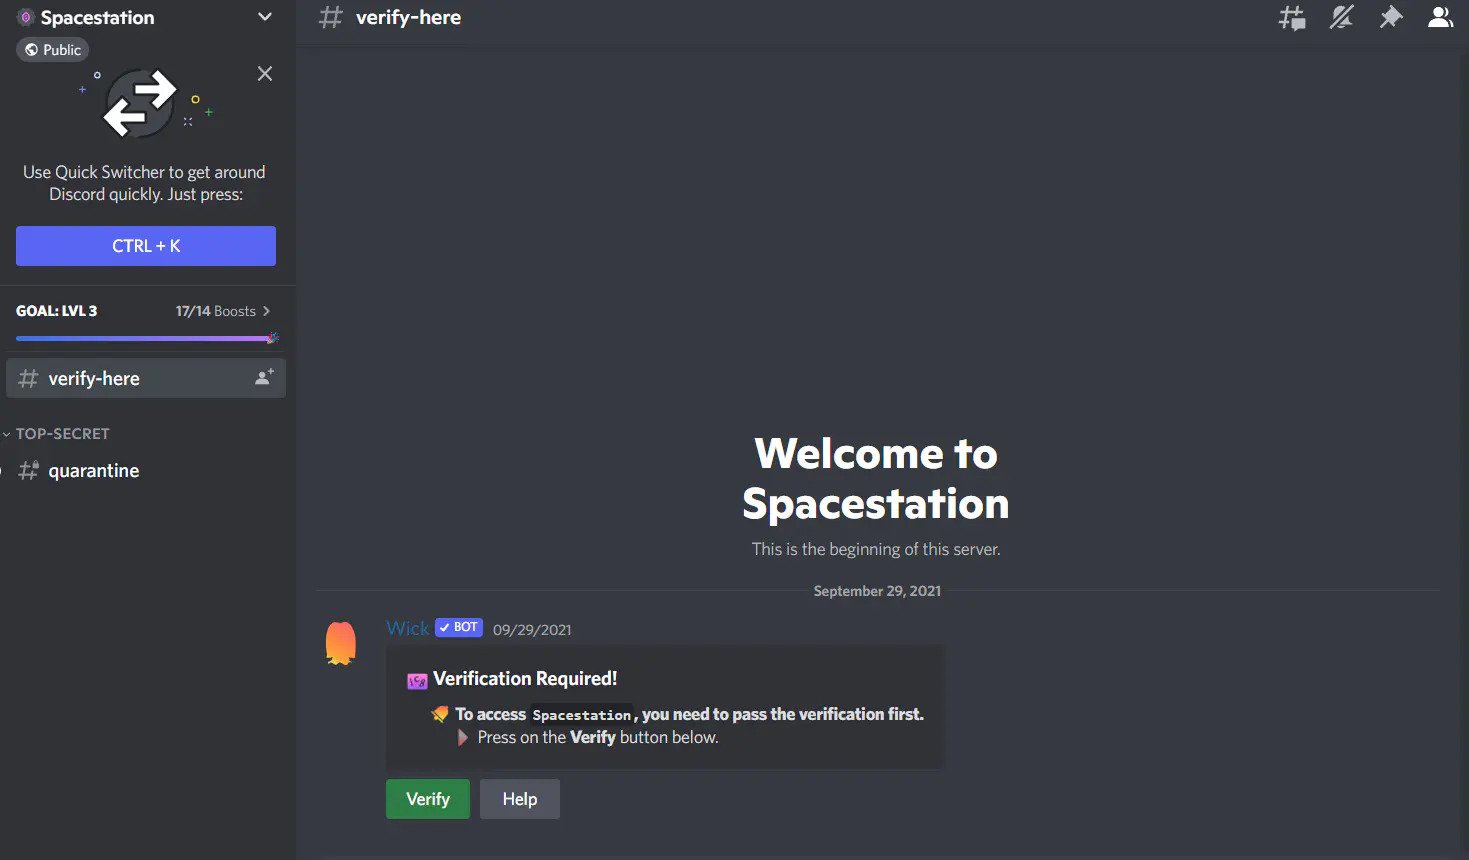 Spacestation verify-here chat in Discord.